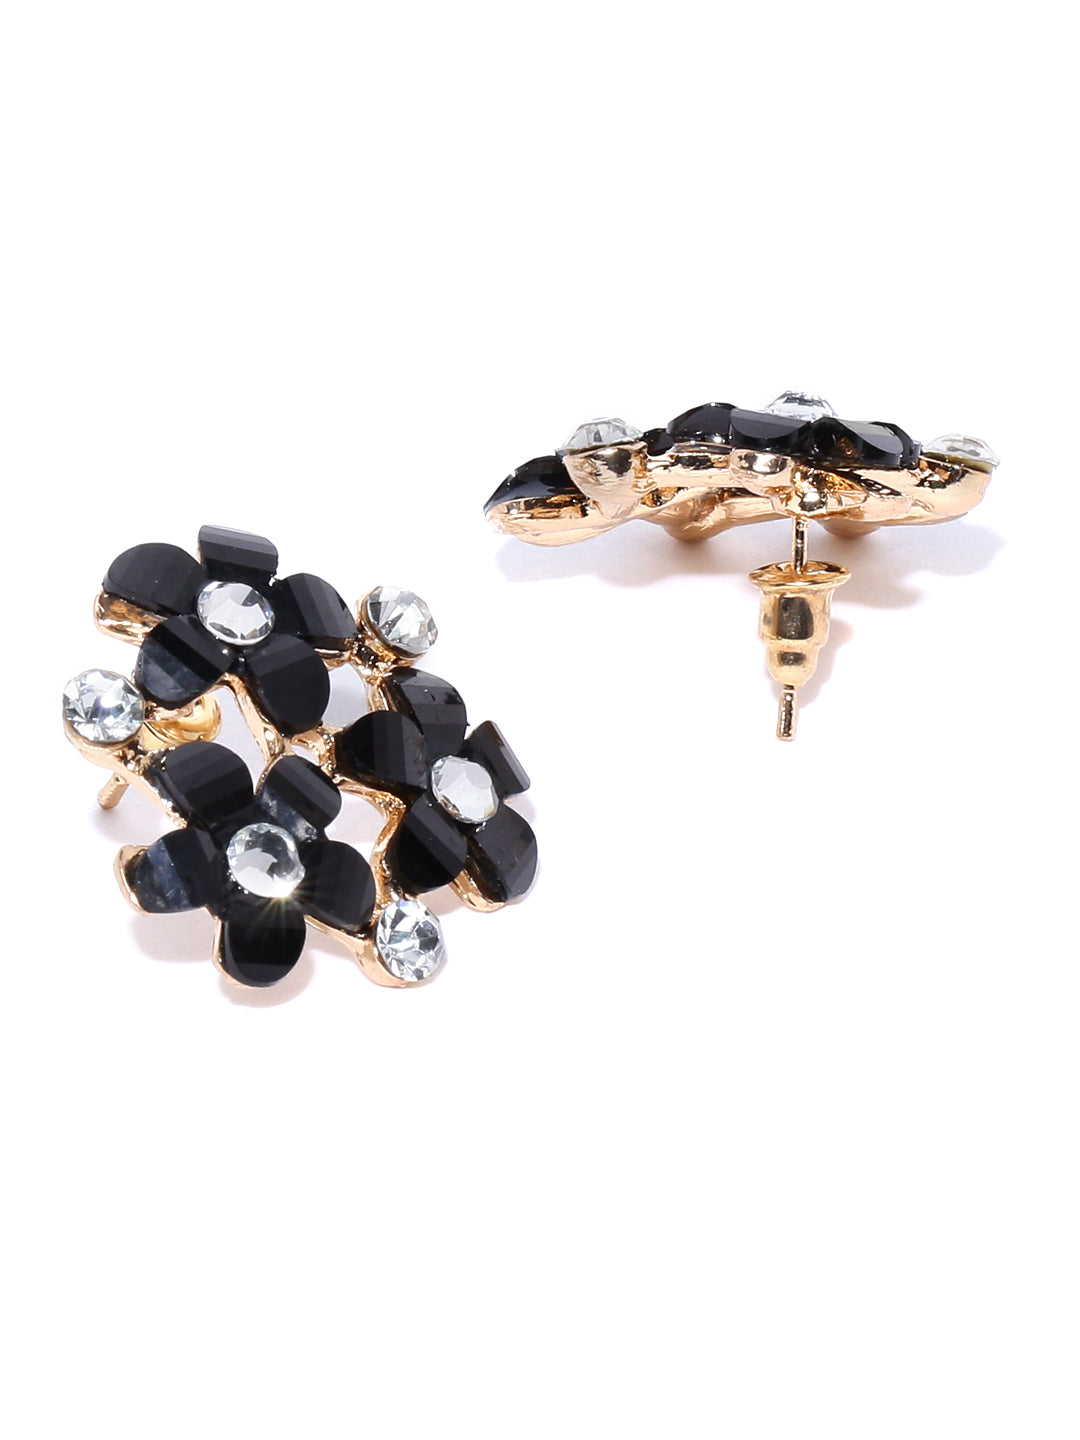 Designer Gold Plated Flower Design Stylish Trendy Latest Collection Black Drop Earrings For Women And Girls